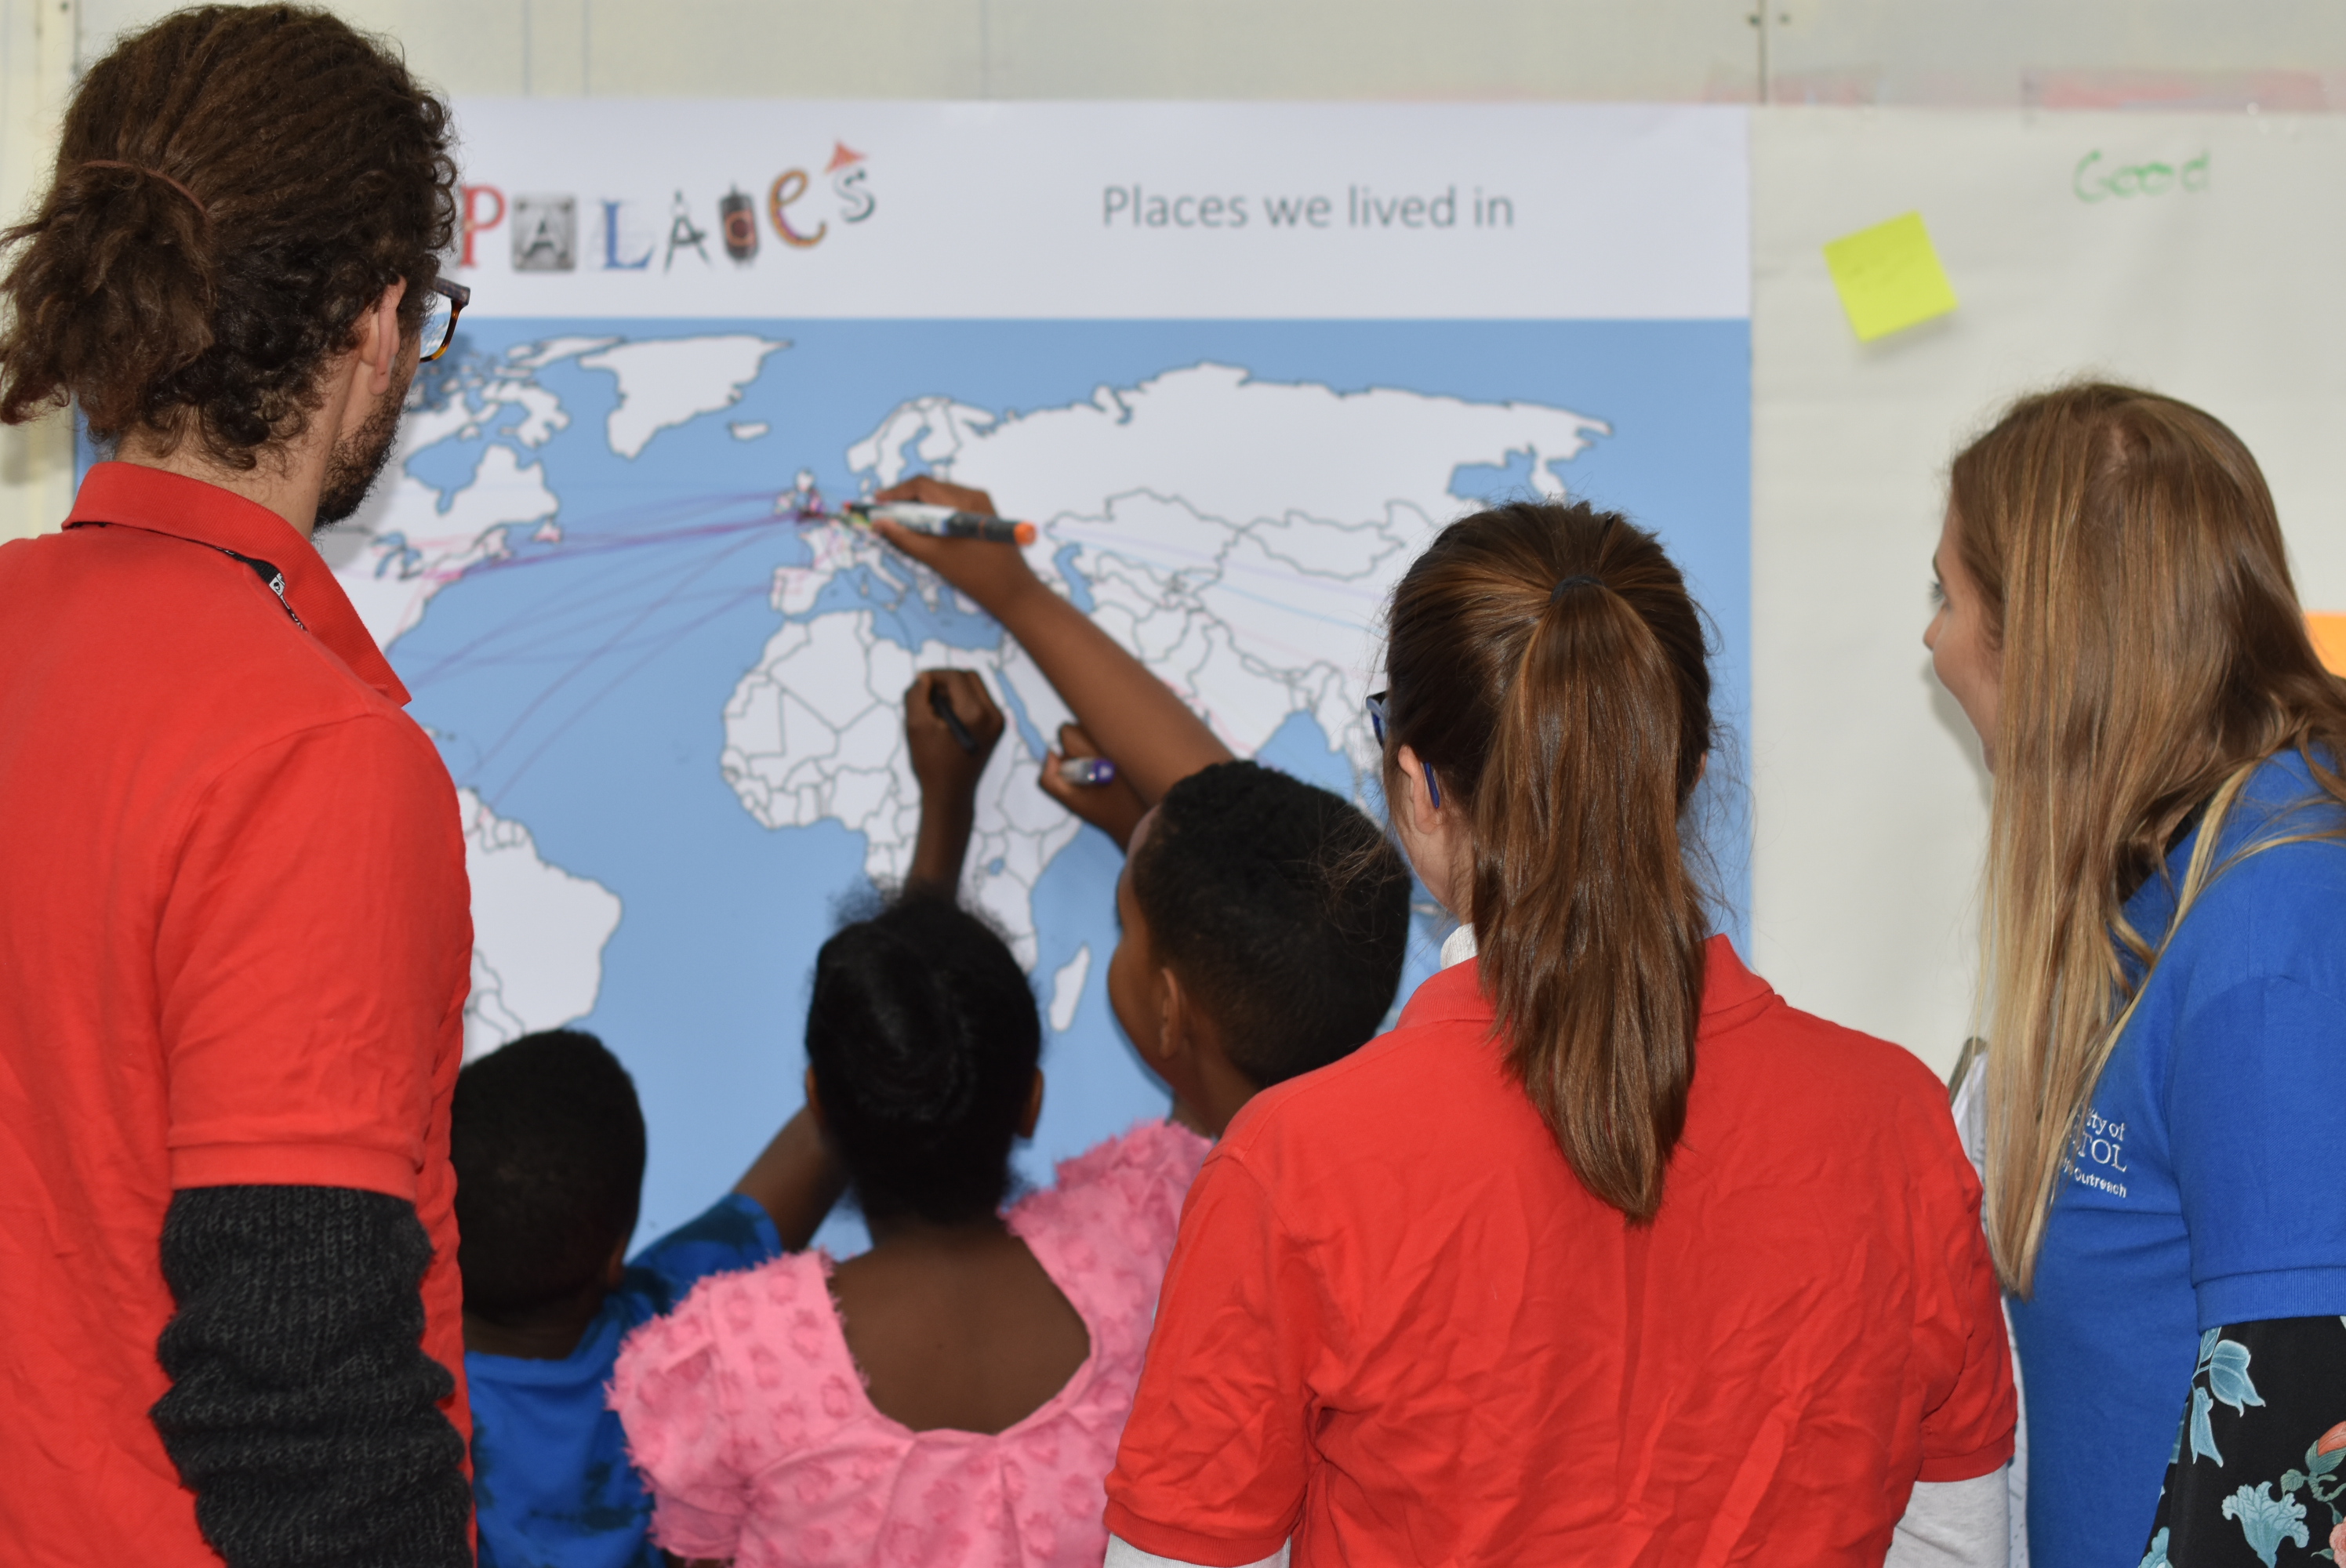 Children drawing lines from across a world map to the UK, watched by adults inbright t-shirts